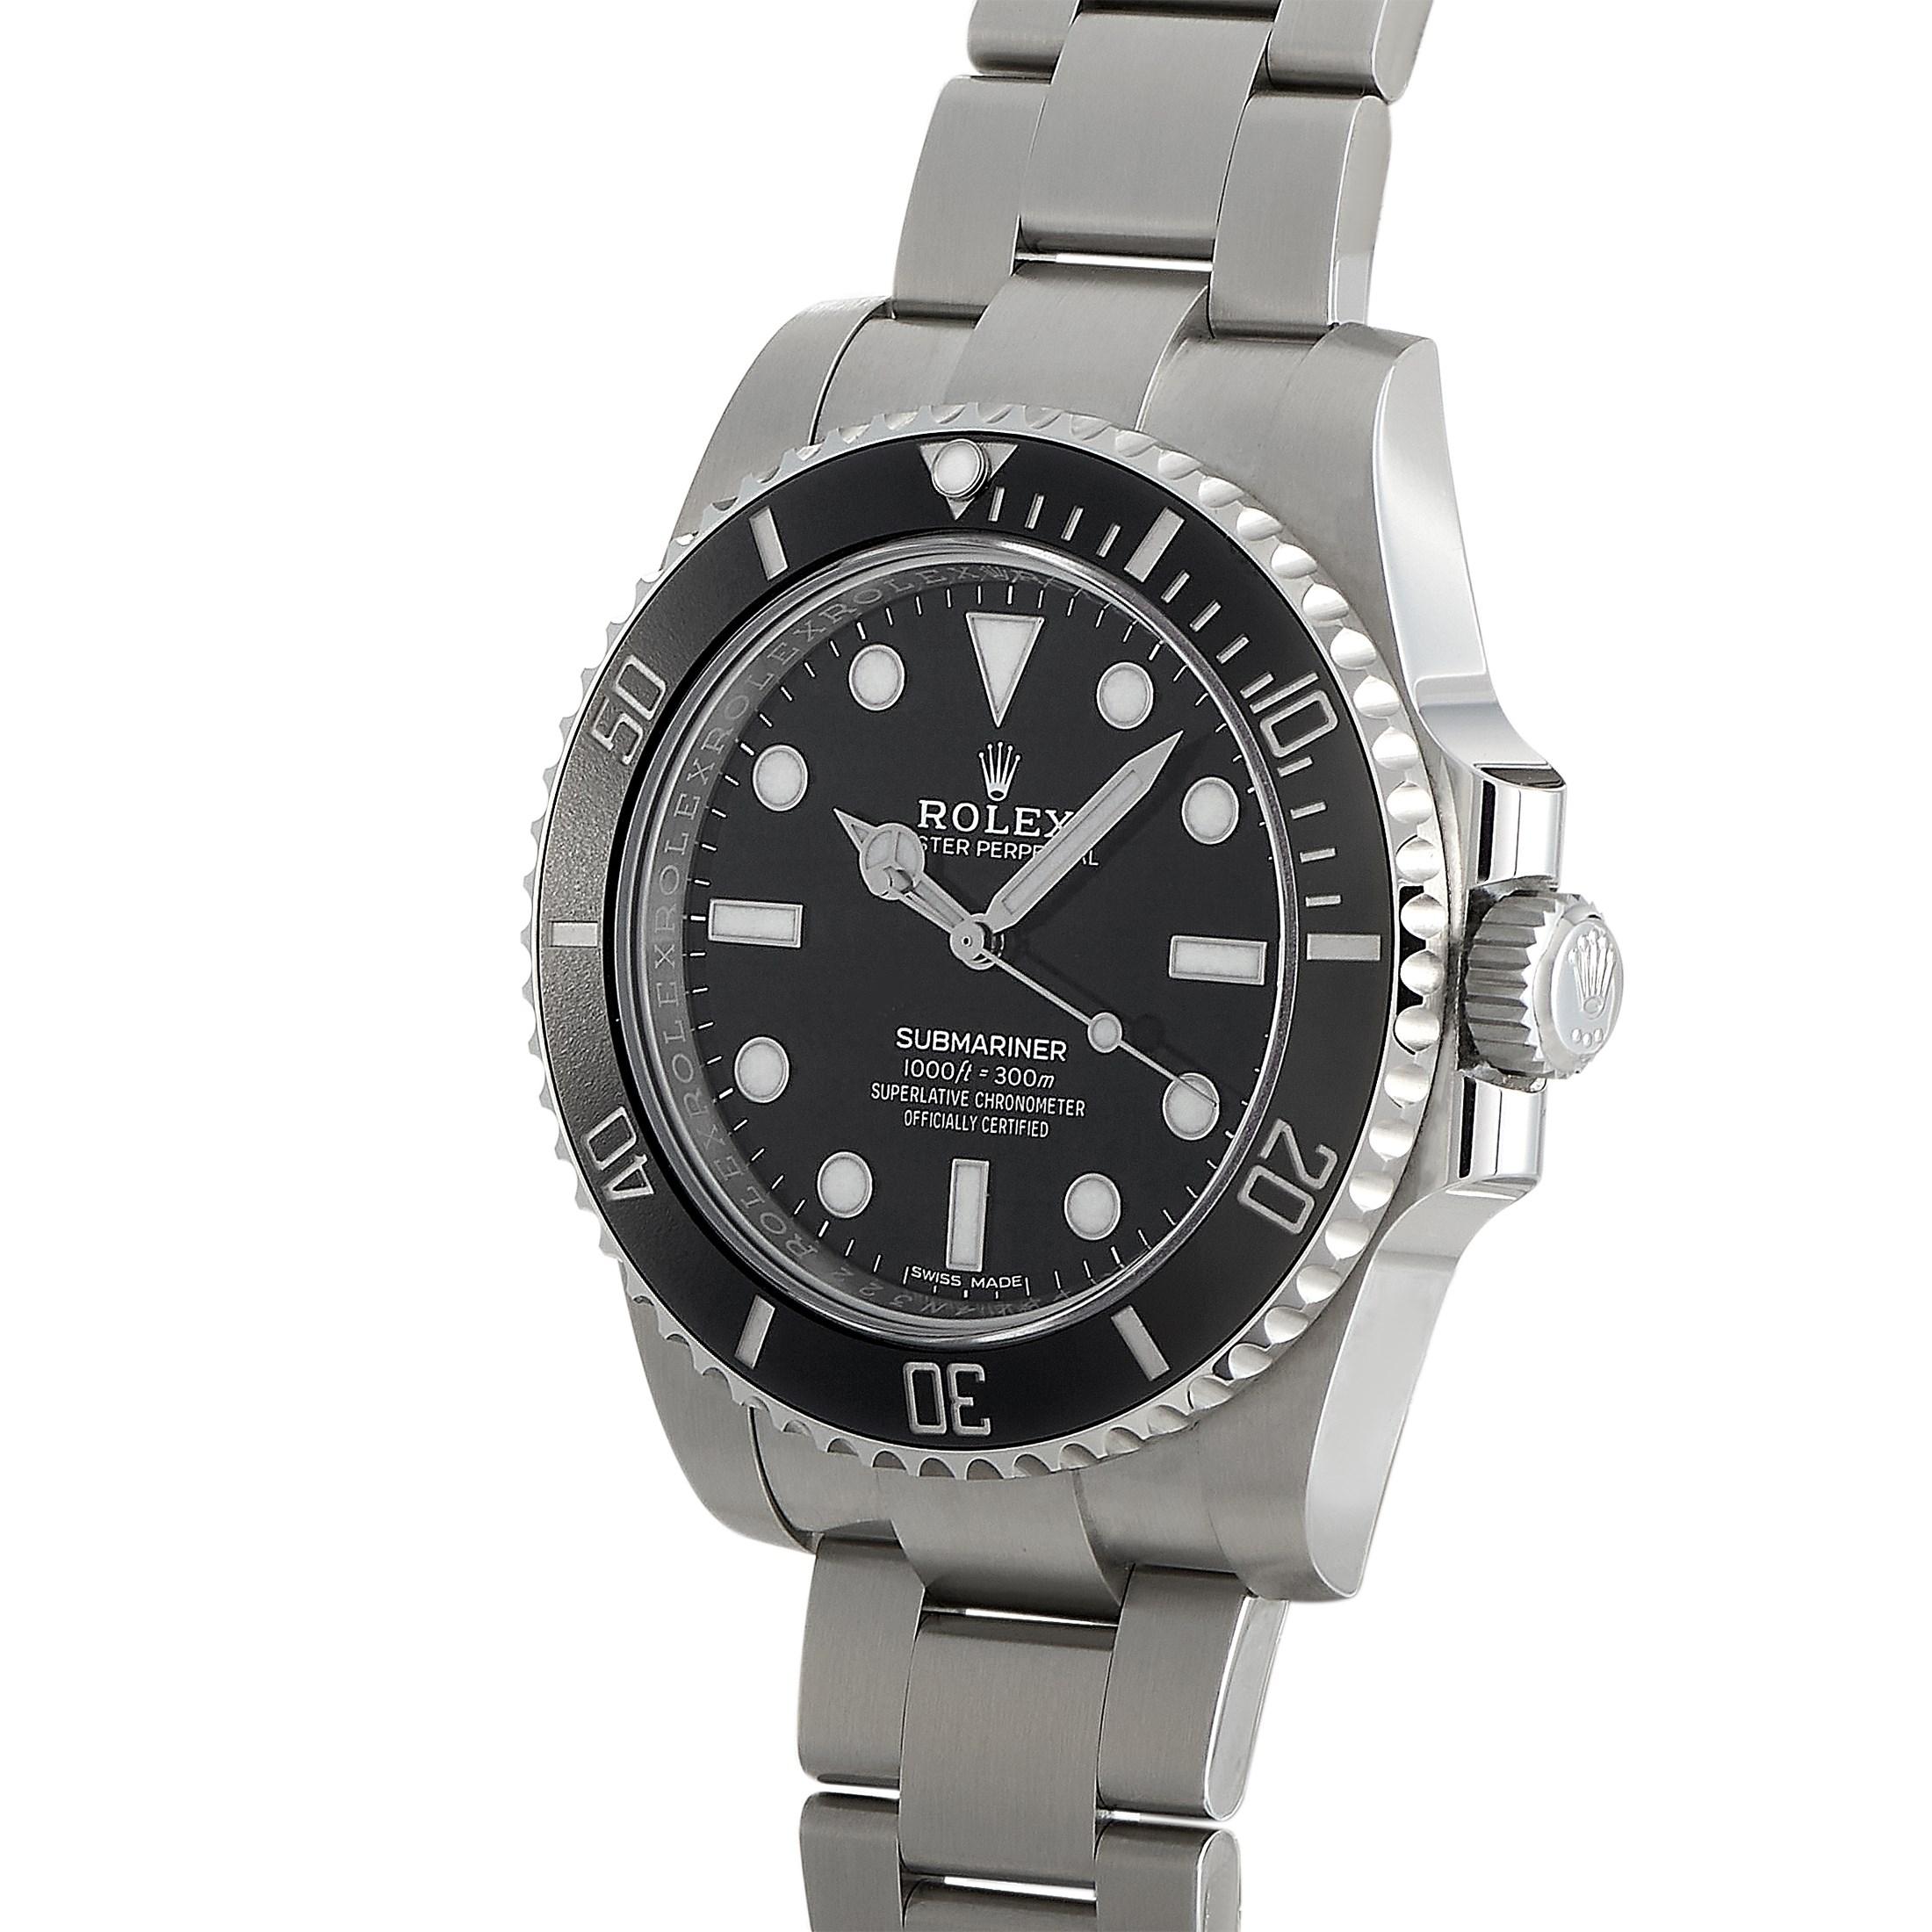 Featuring a 40mm Oystersteel case, this watch is designed with a solid-link Oyster bracelet and a monobloc middle case. Its black unidirectional rotatable bezel features a scratch-resistant Cerachrom insert and platinum-coated graduations and